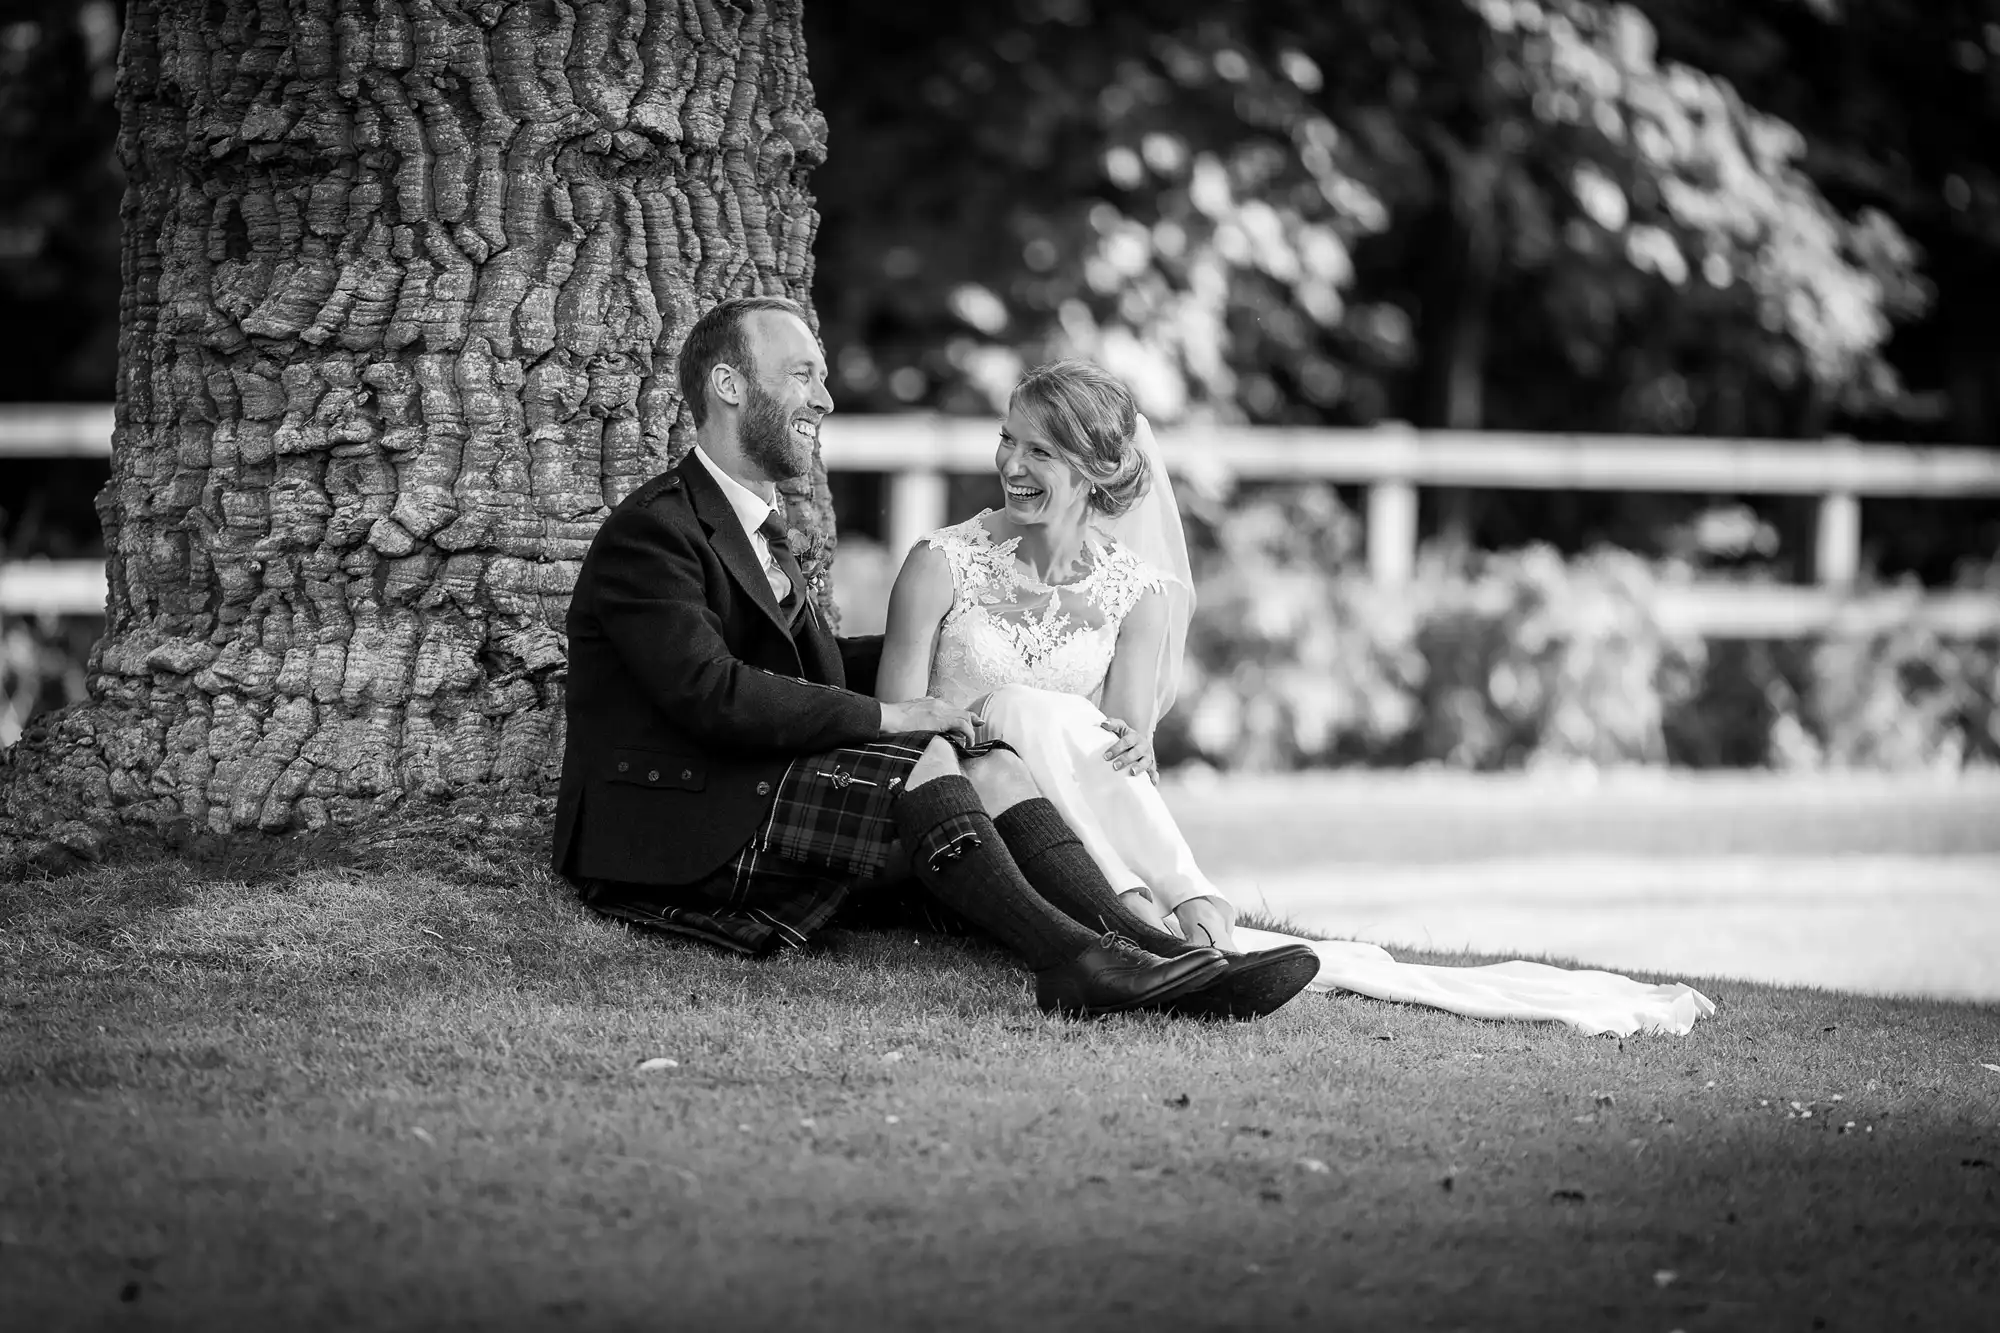 A couple in wedding attire sits on the grass, leaned against a tree, laughing and looking at each other.